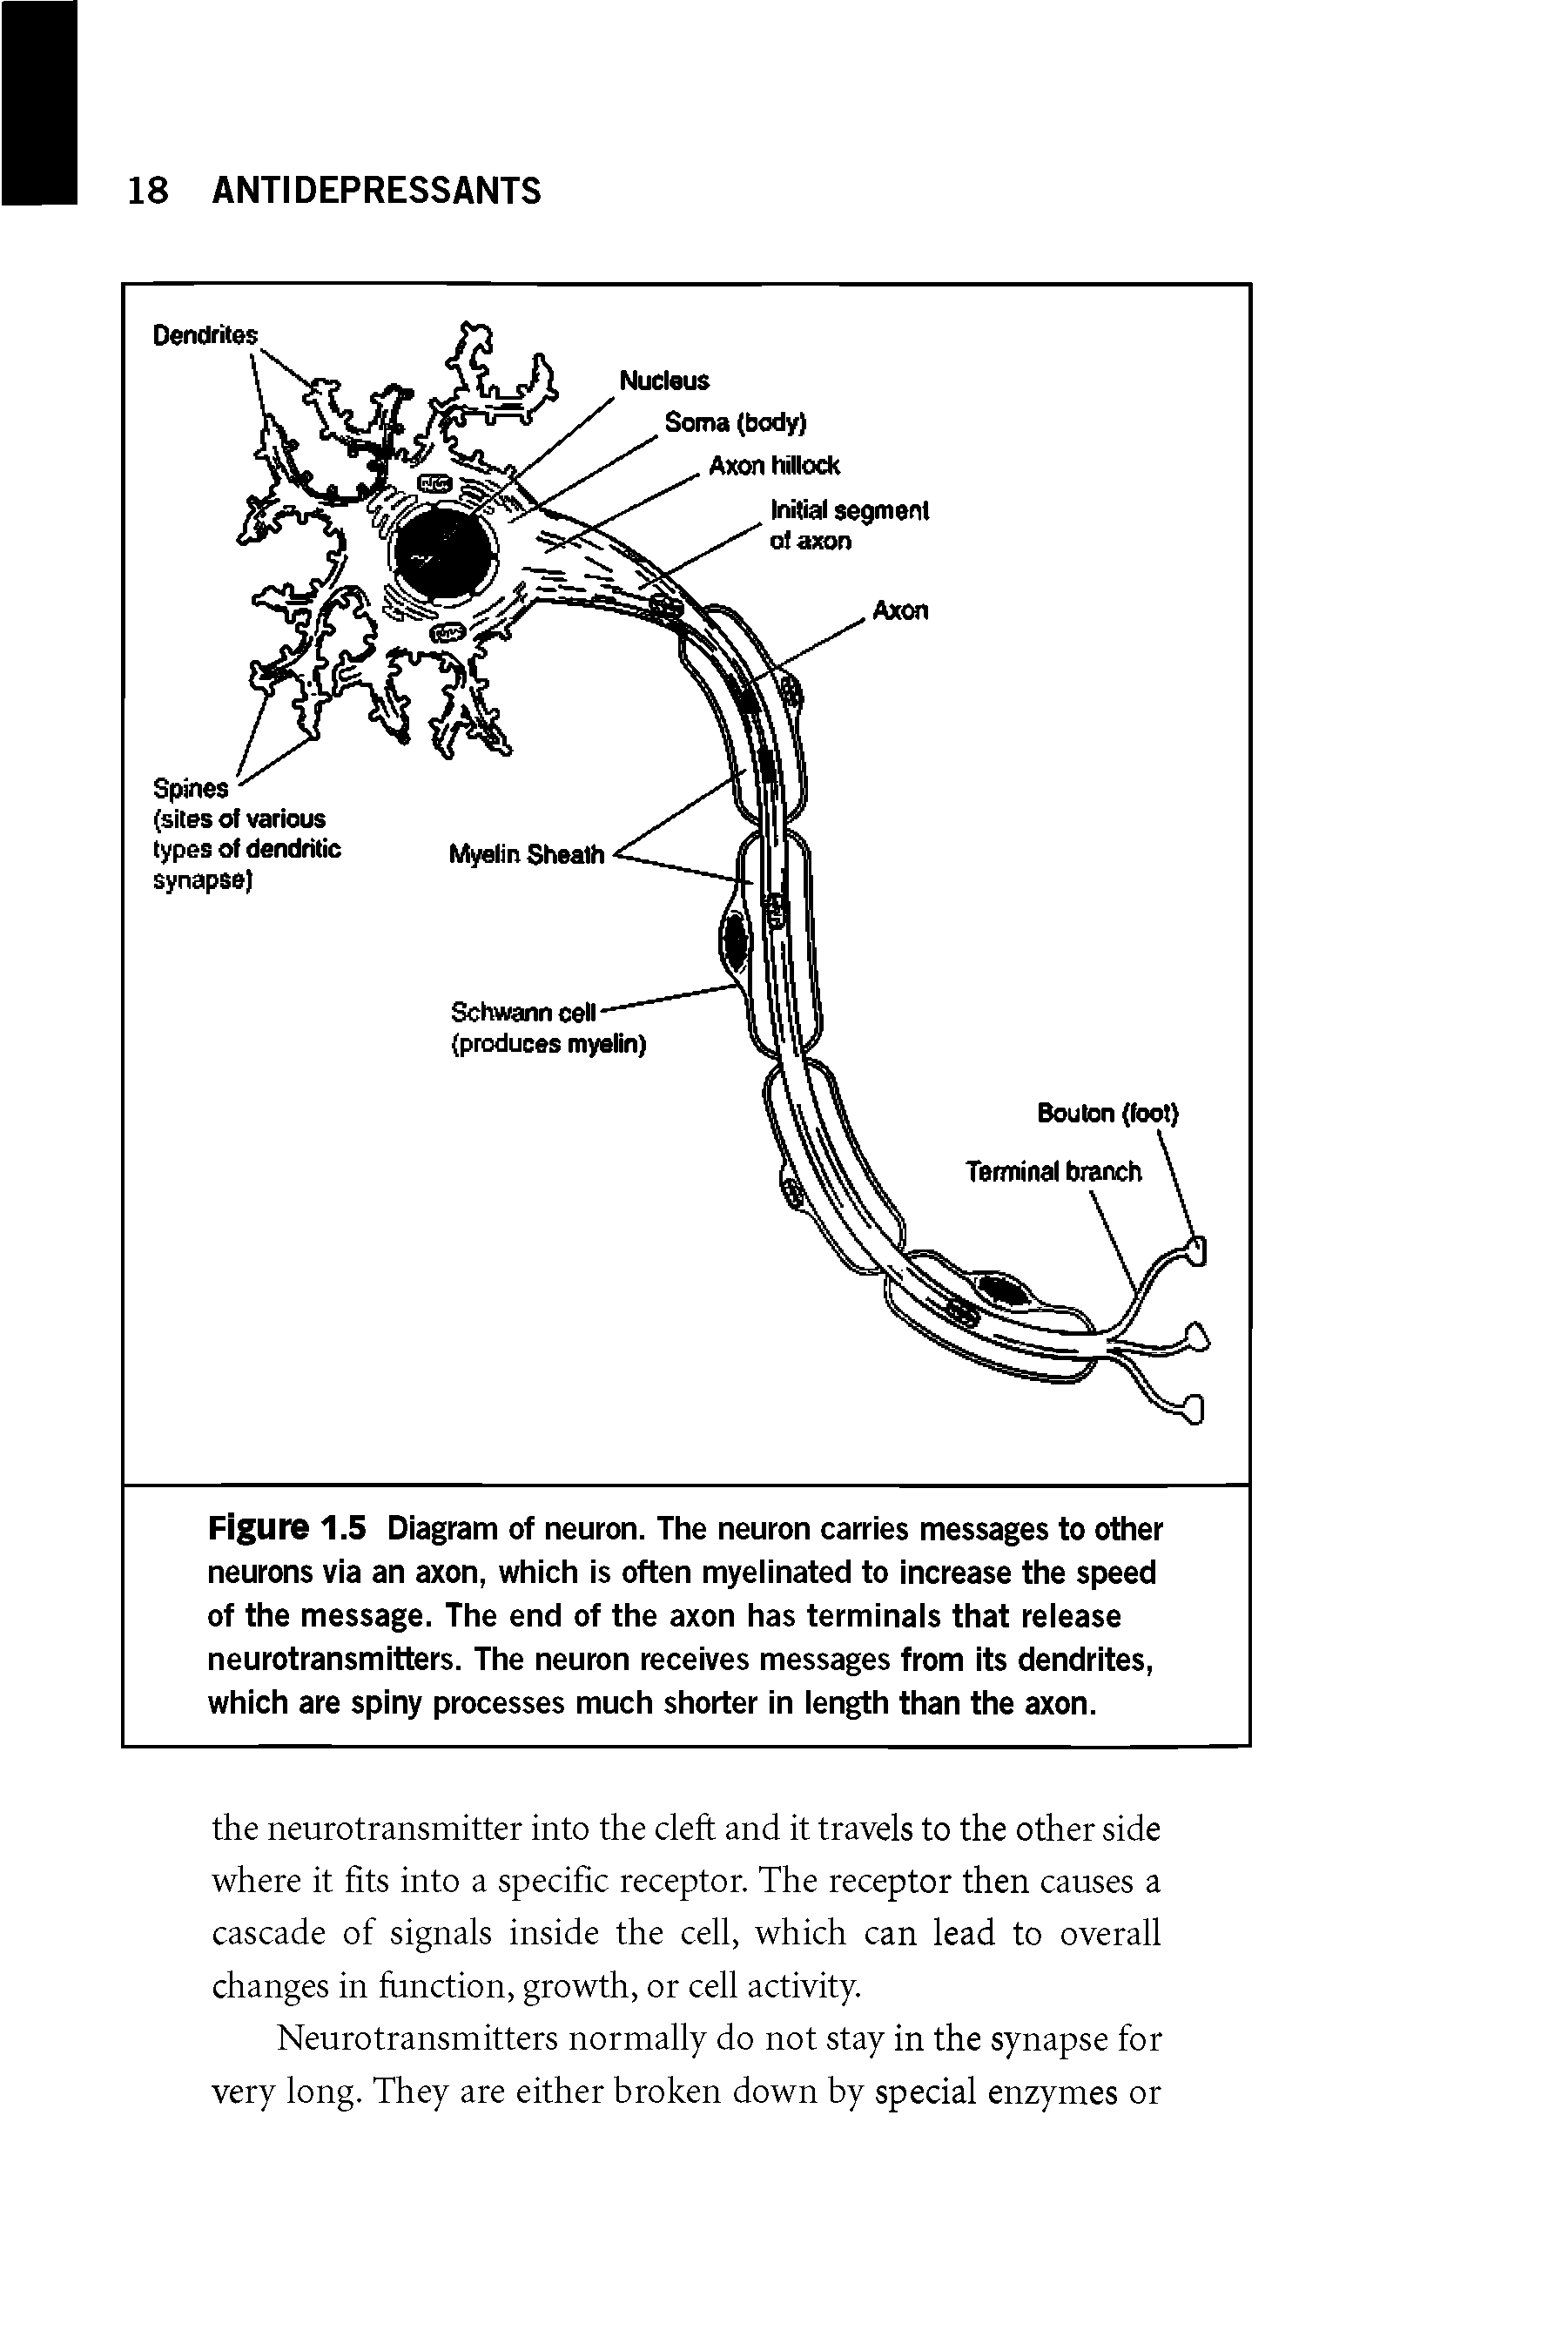 Figure 1.5 Diagram of neuron. The neuron carries messages to other neurons via an axon, which is often myelinated to increase the speed of the message. The end of the axon has terminals that release neurotransmitters. The neuron receives messages from its dendrites, which are spiny processes much shorter in length than the axon.